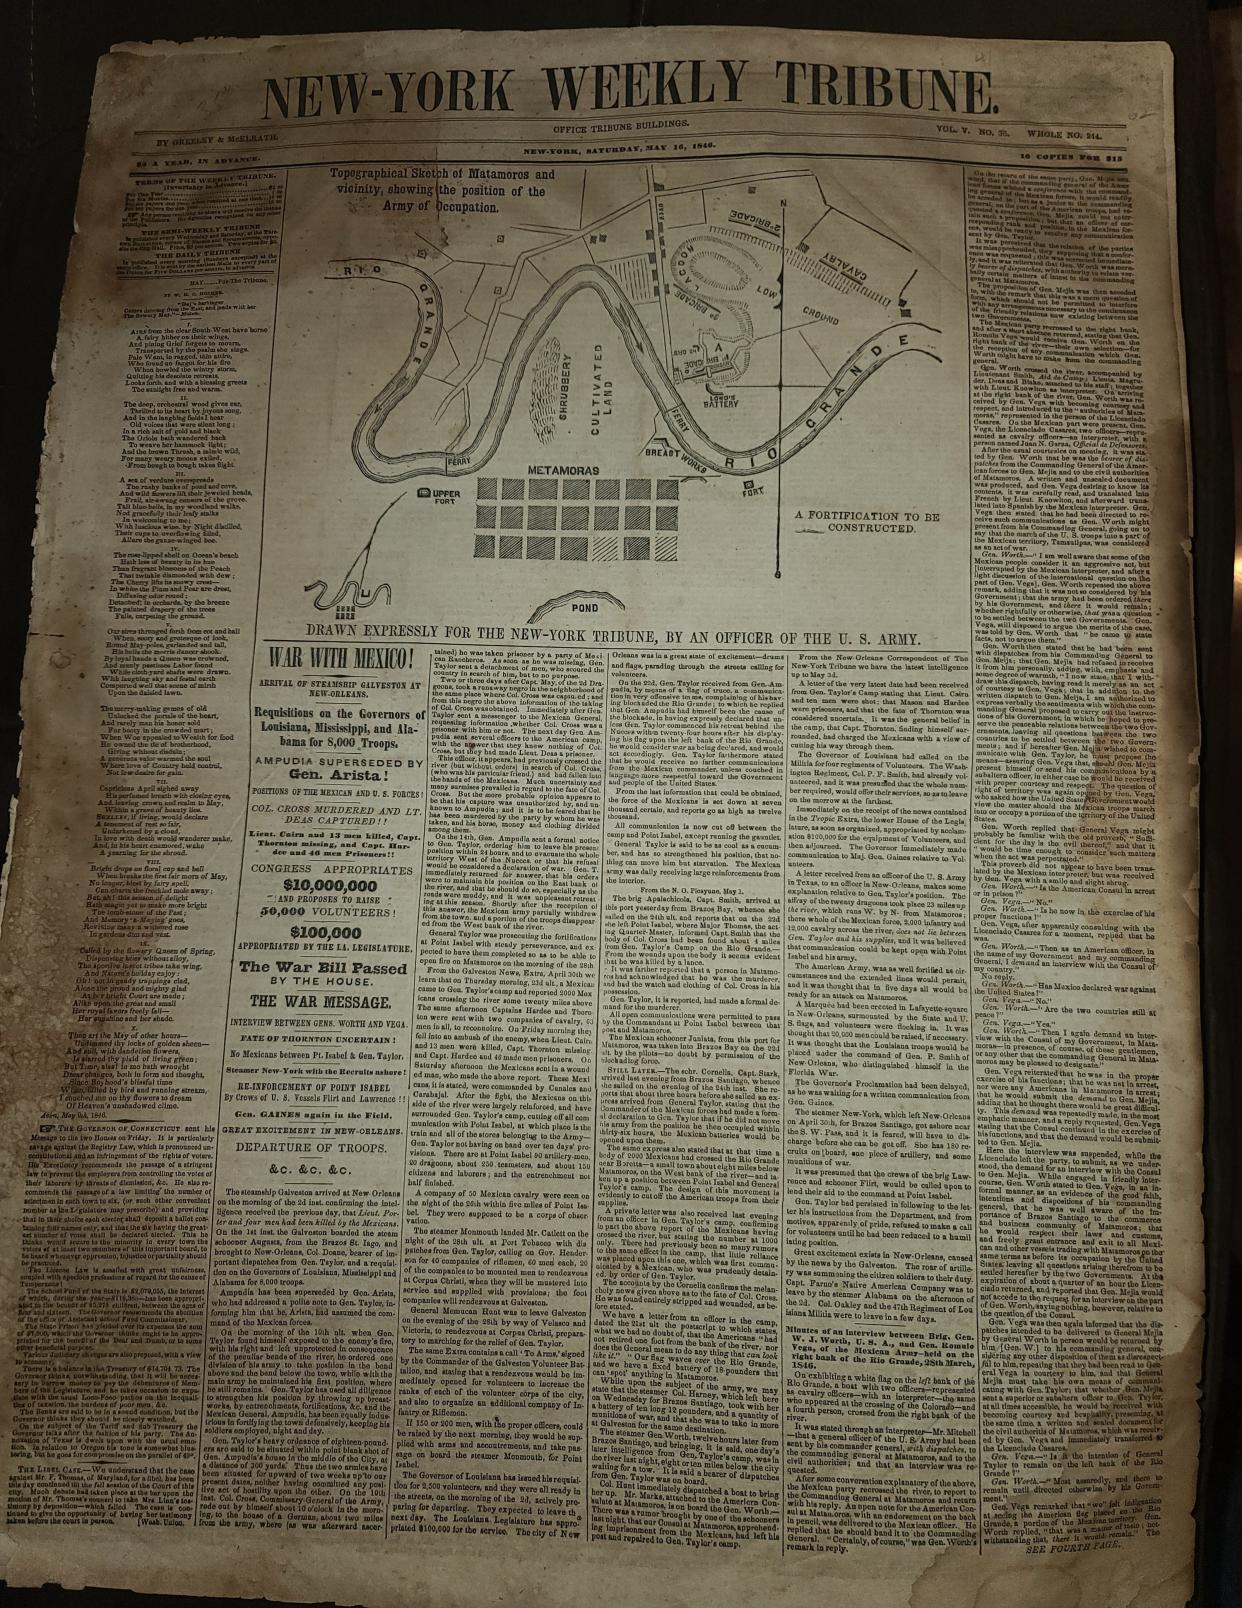 A May 16, 1846 newspaper showing the position of Taylor's army in Matamoros, Mexico. From the personal collection of Herb Canales.